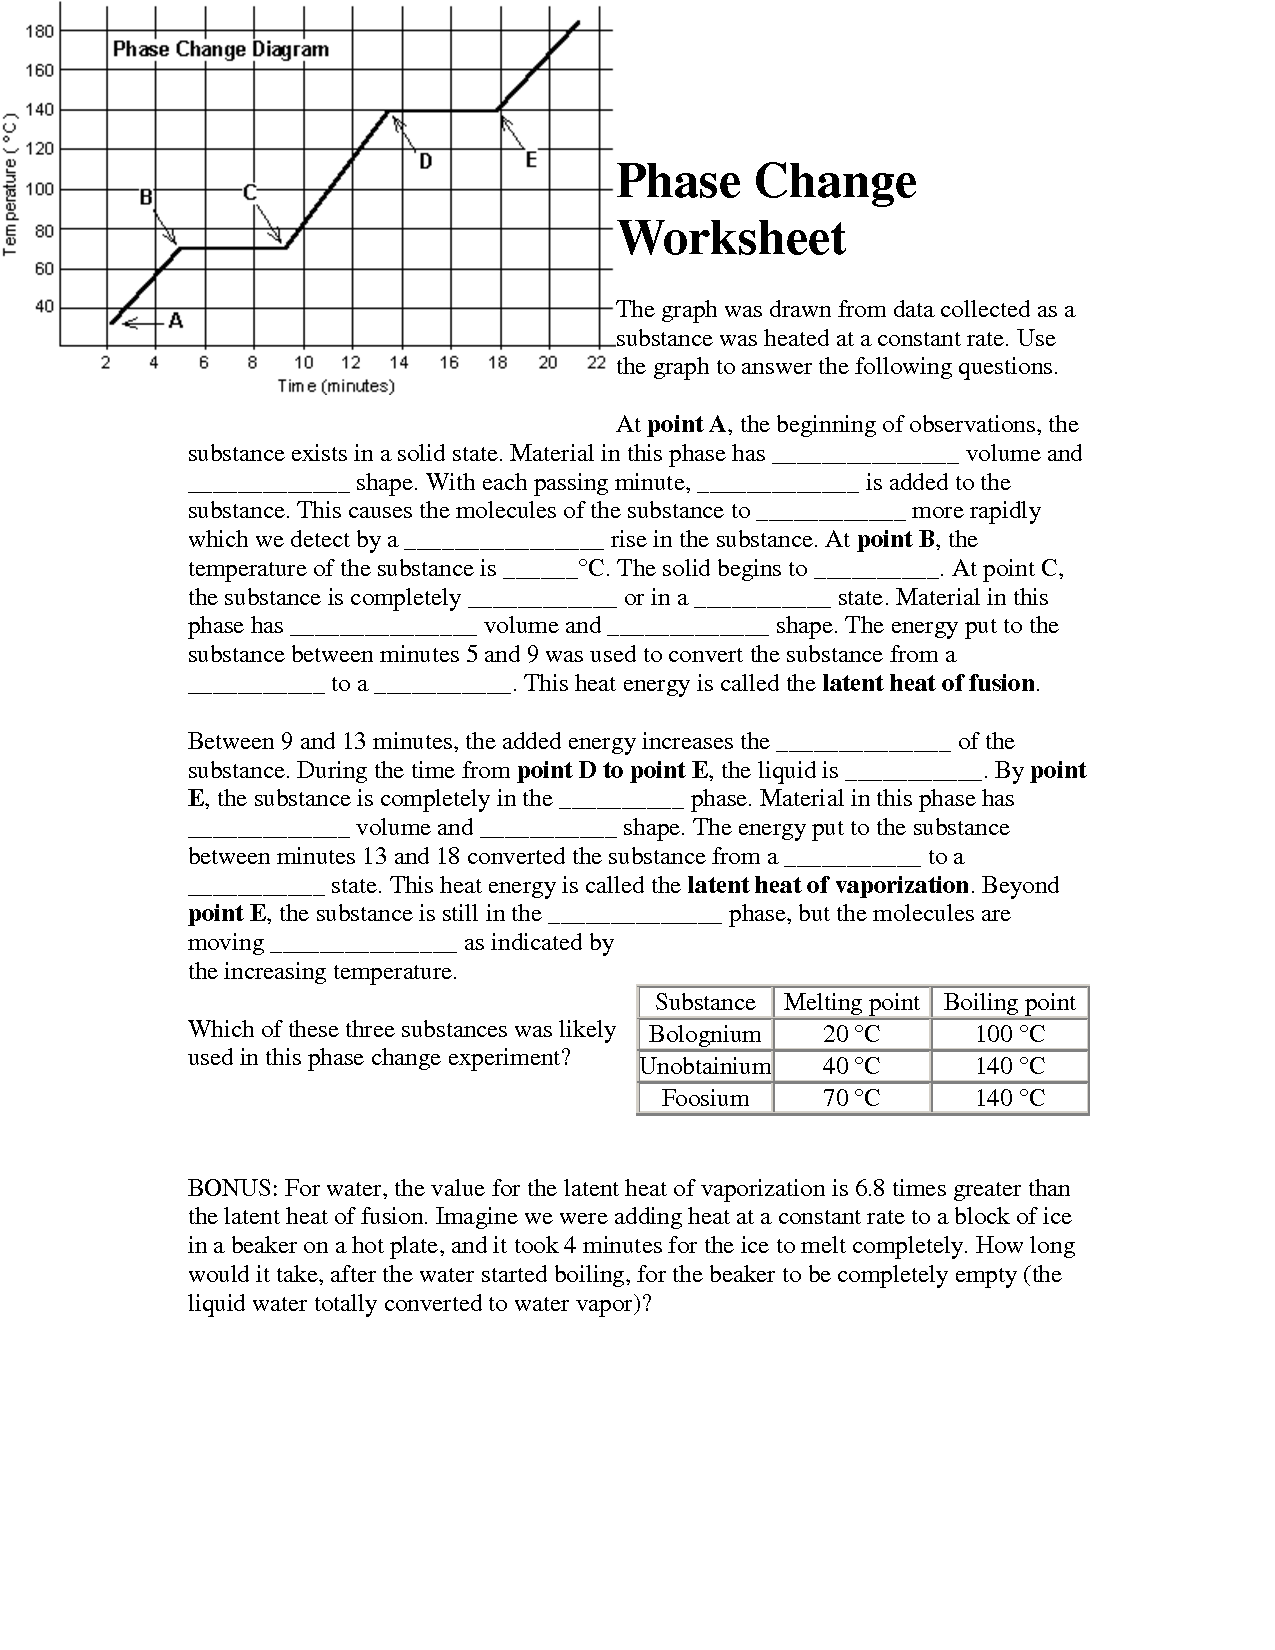 Phase Change Problems Worksheet With Answers